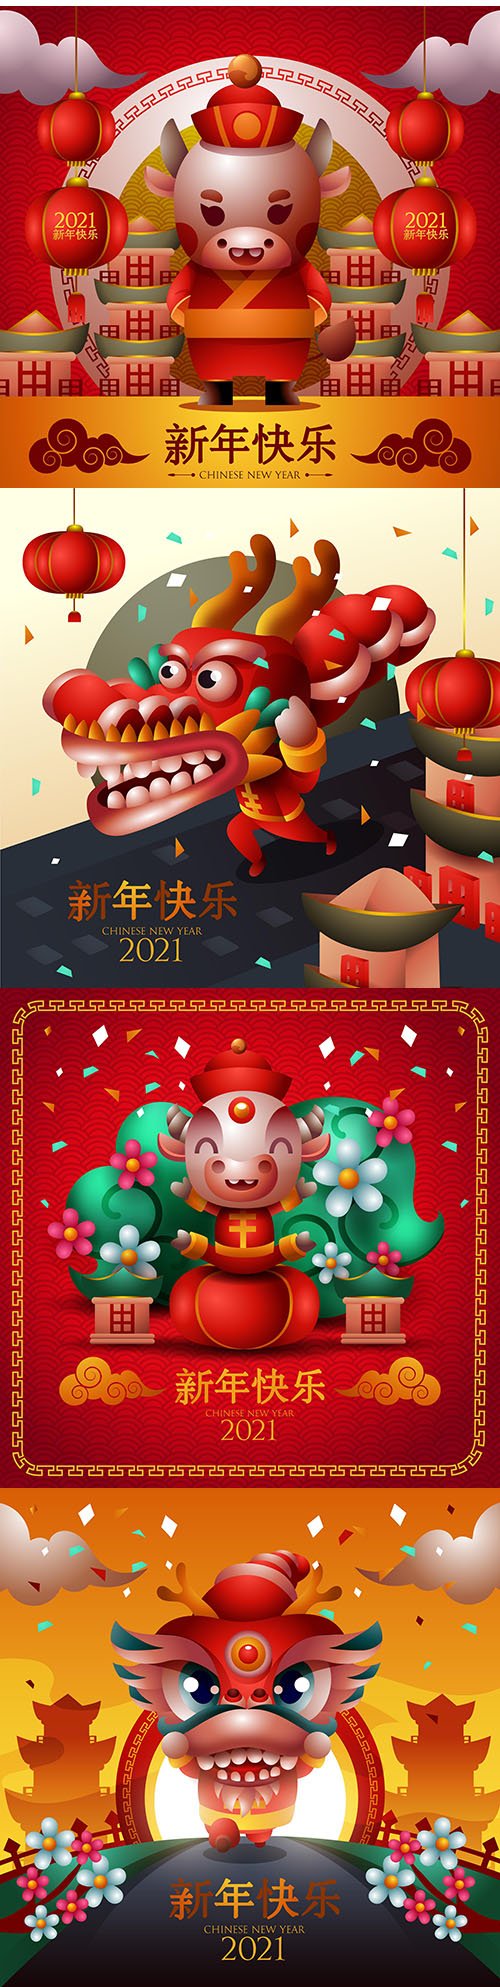 Happy Chinese New Year flower and lantern decorative design